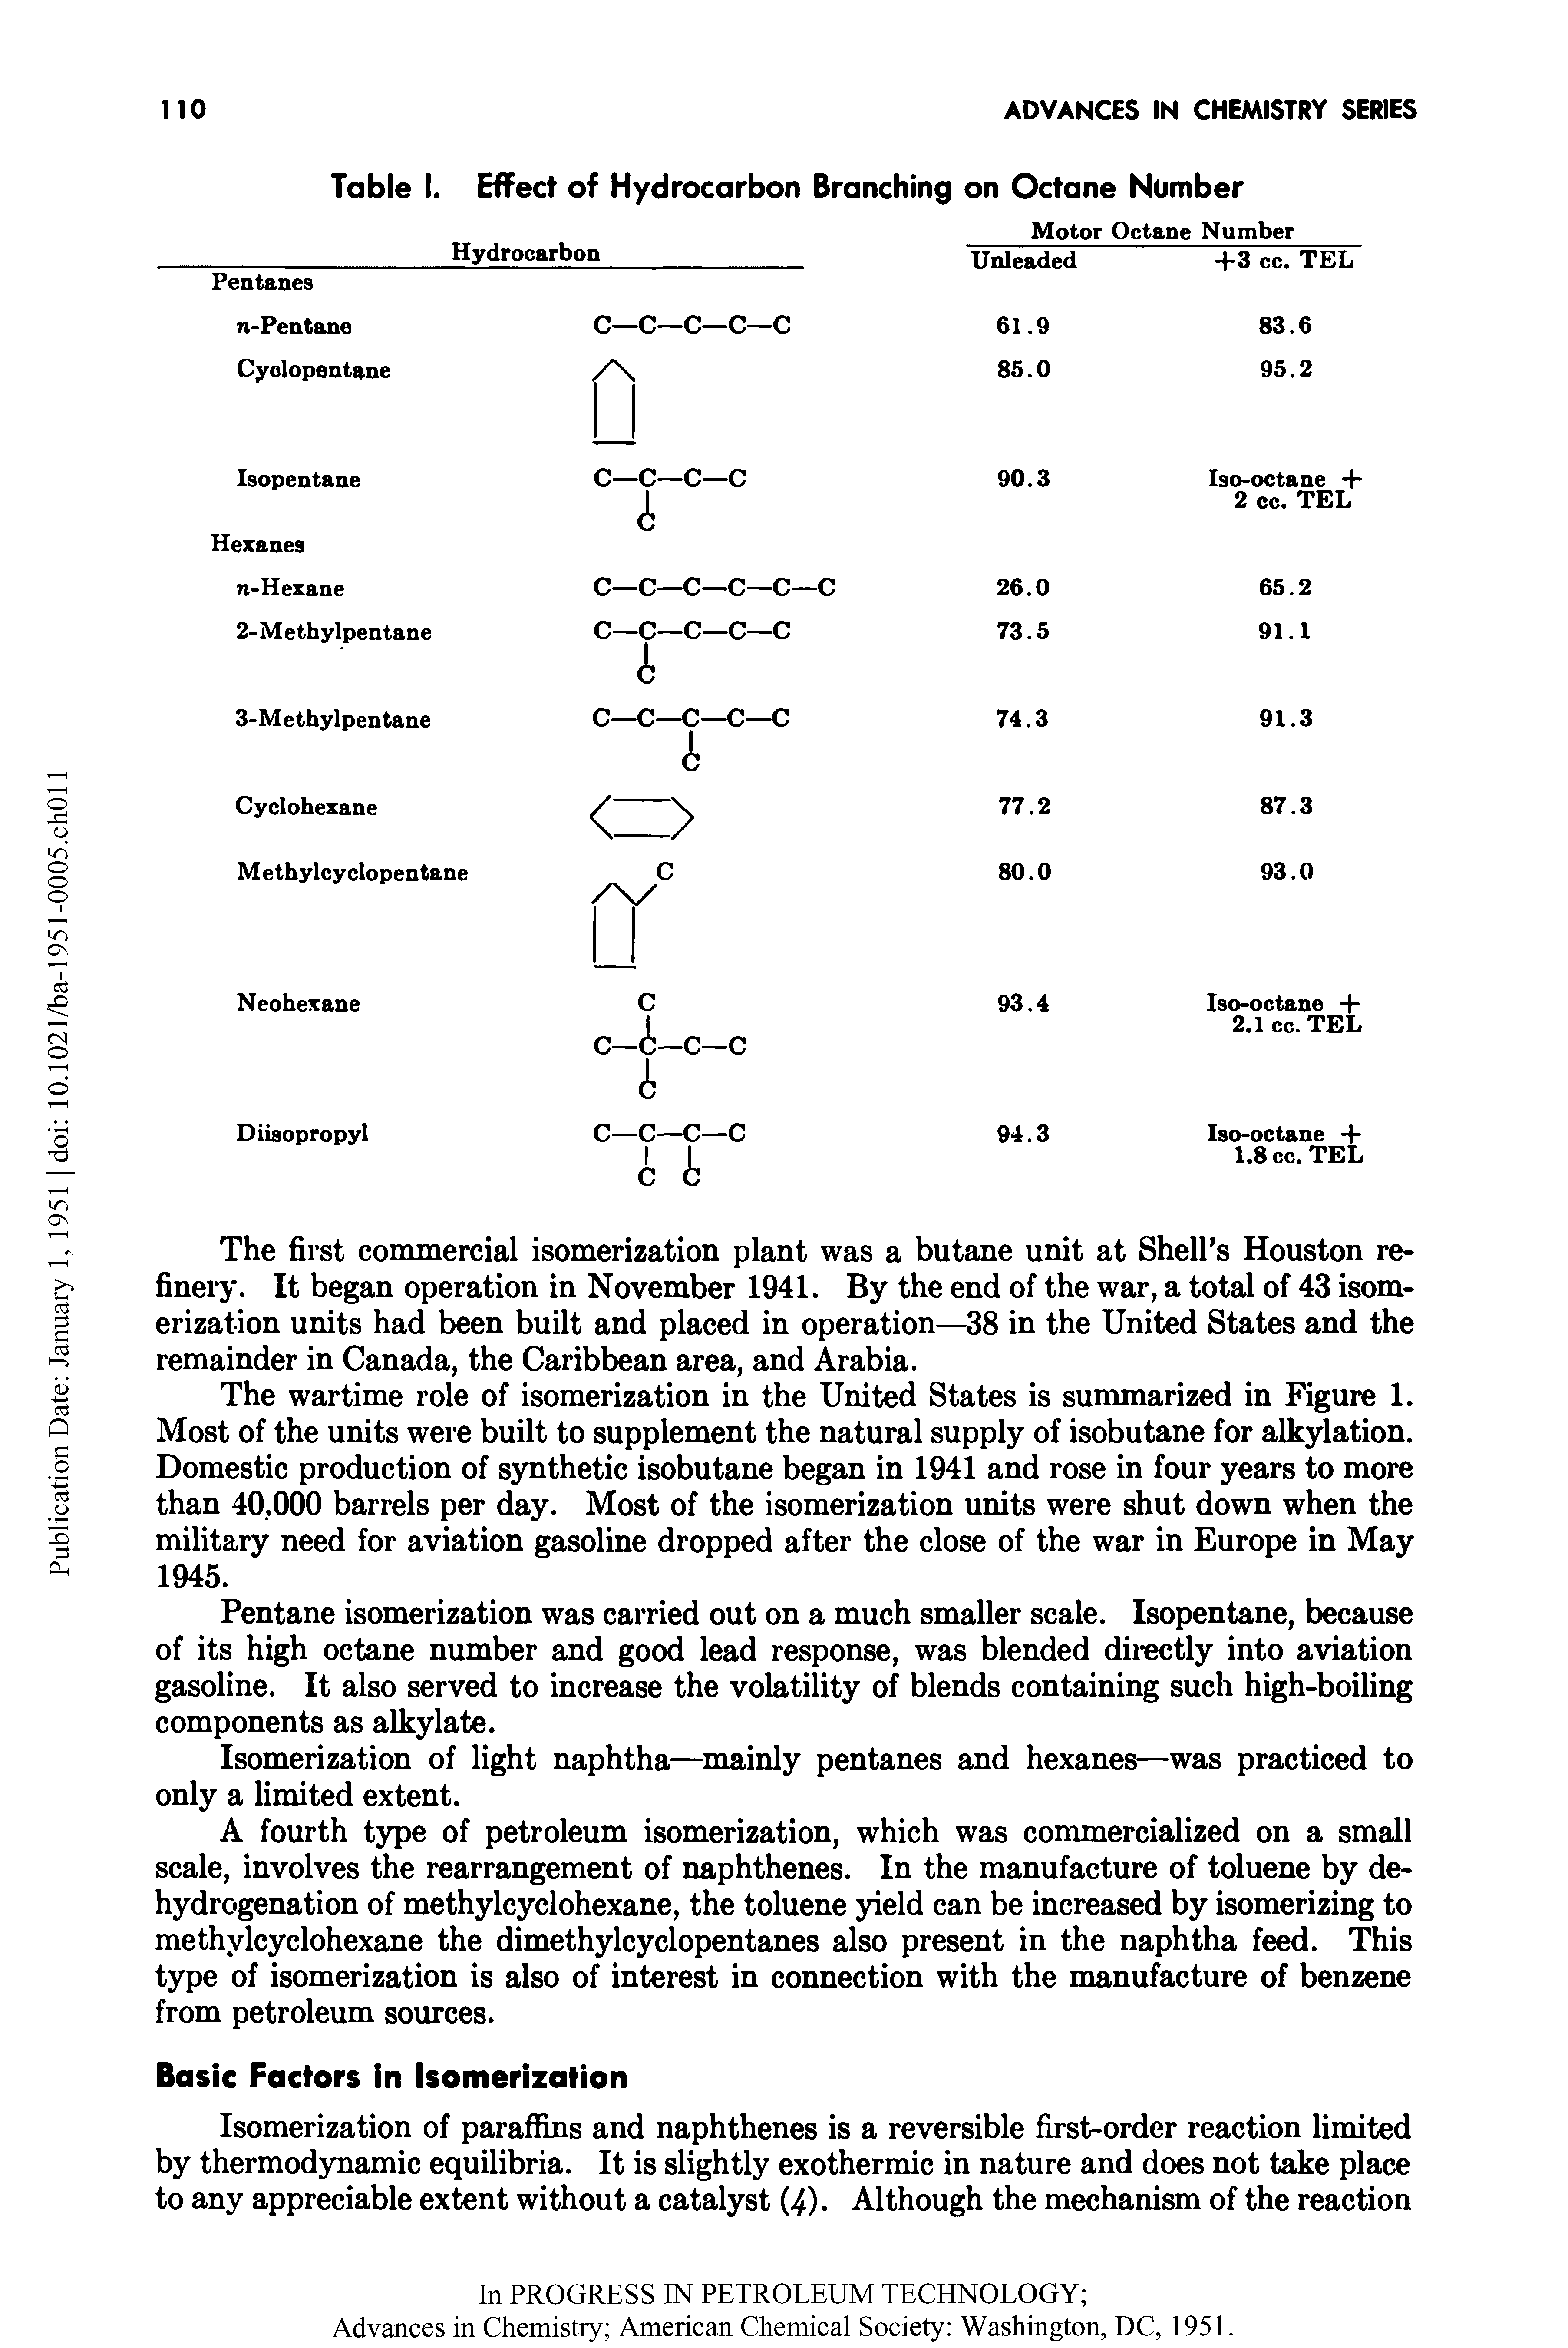 Table I. Effect of Hydrocarbon Branching on Octane Number...